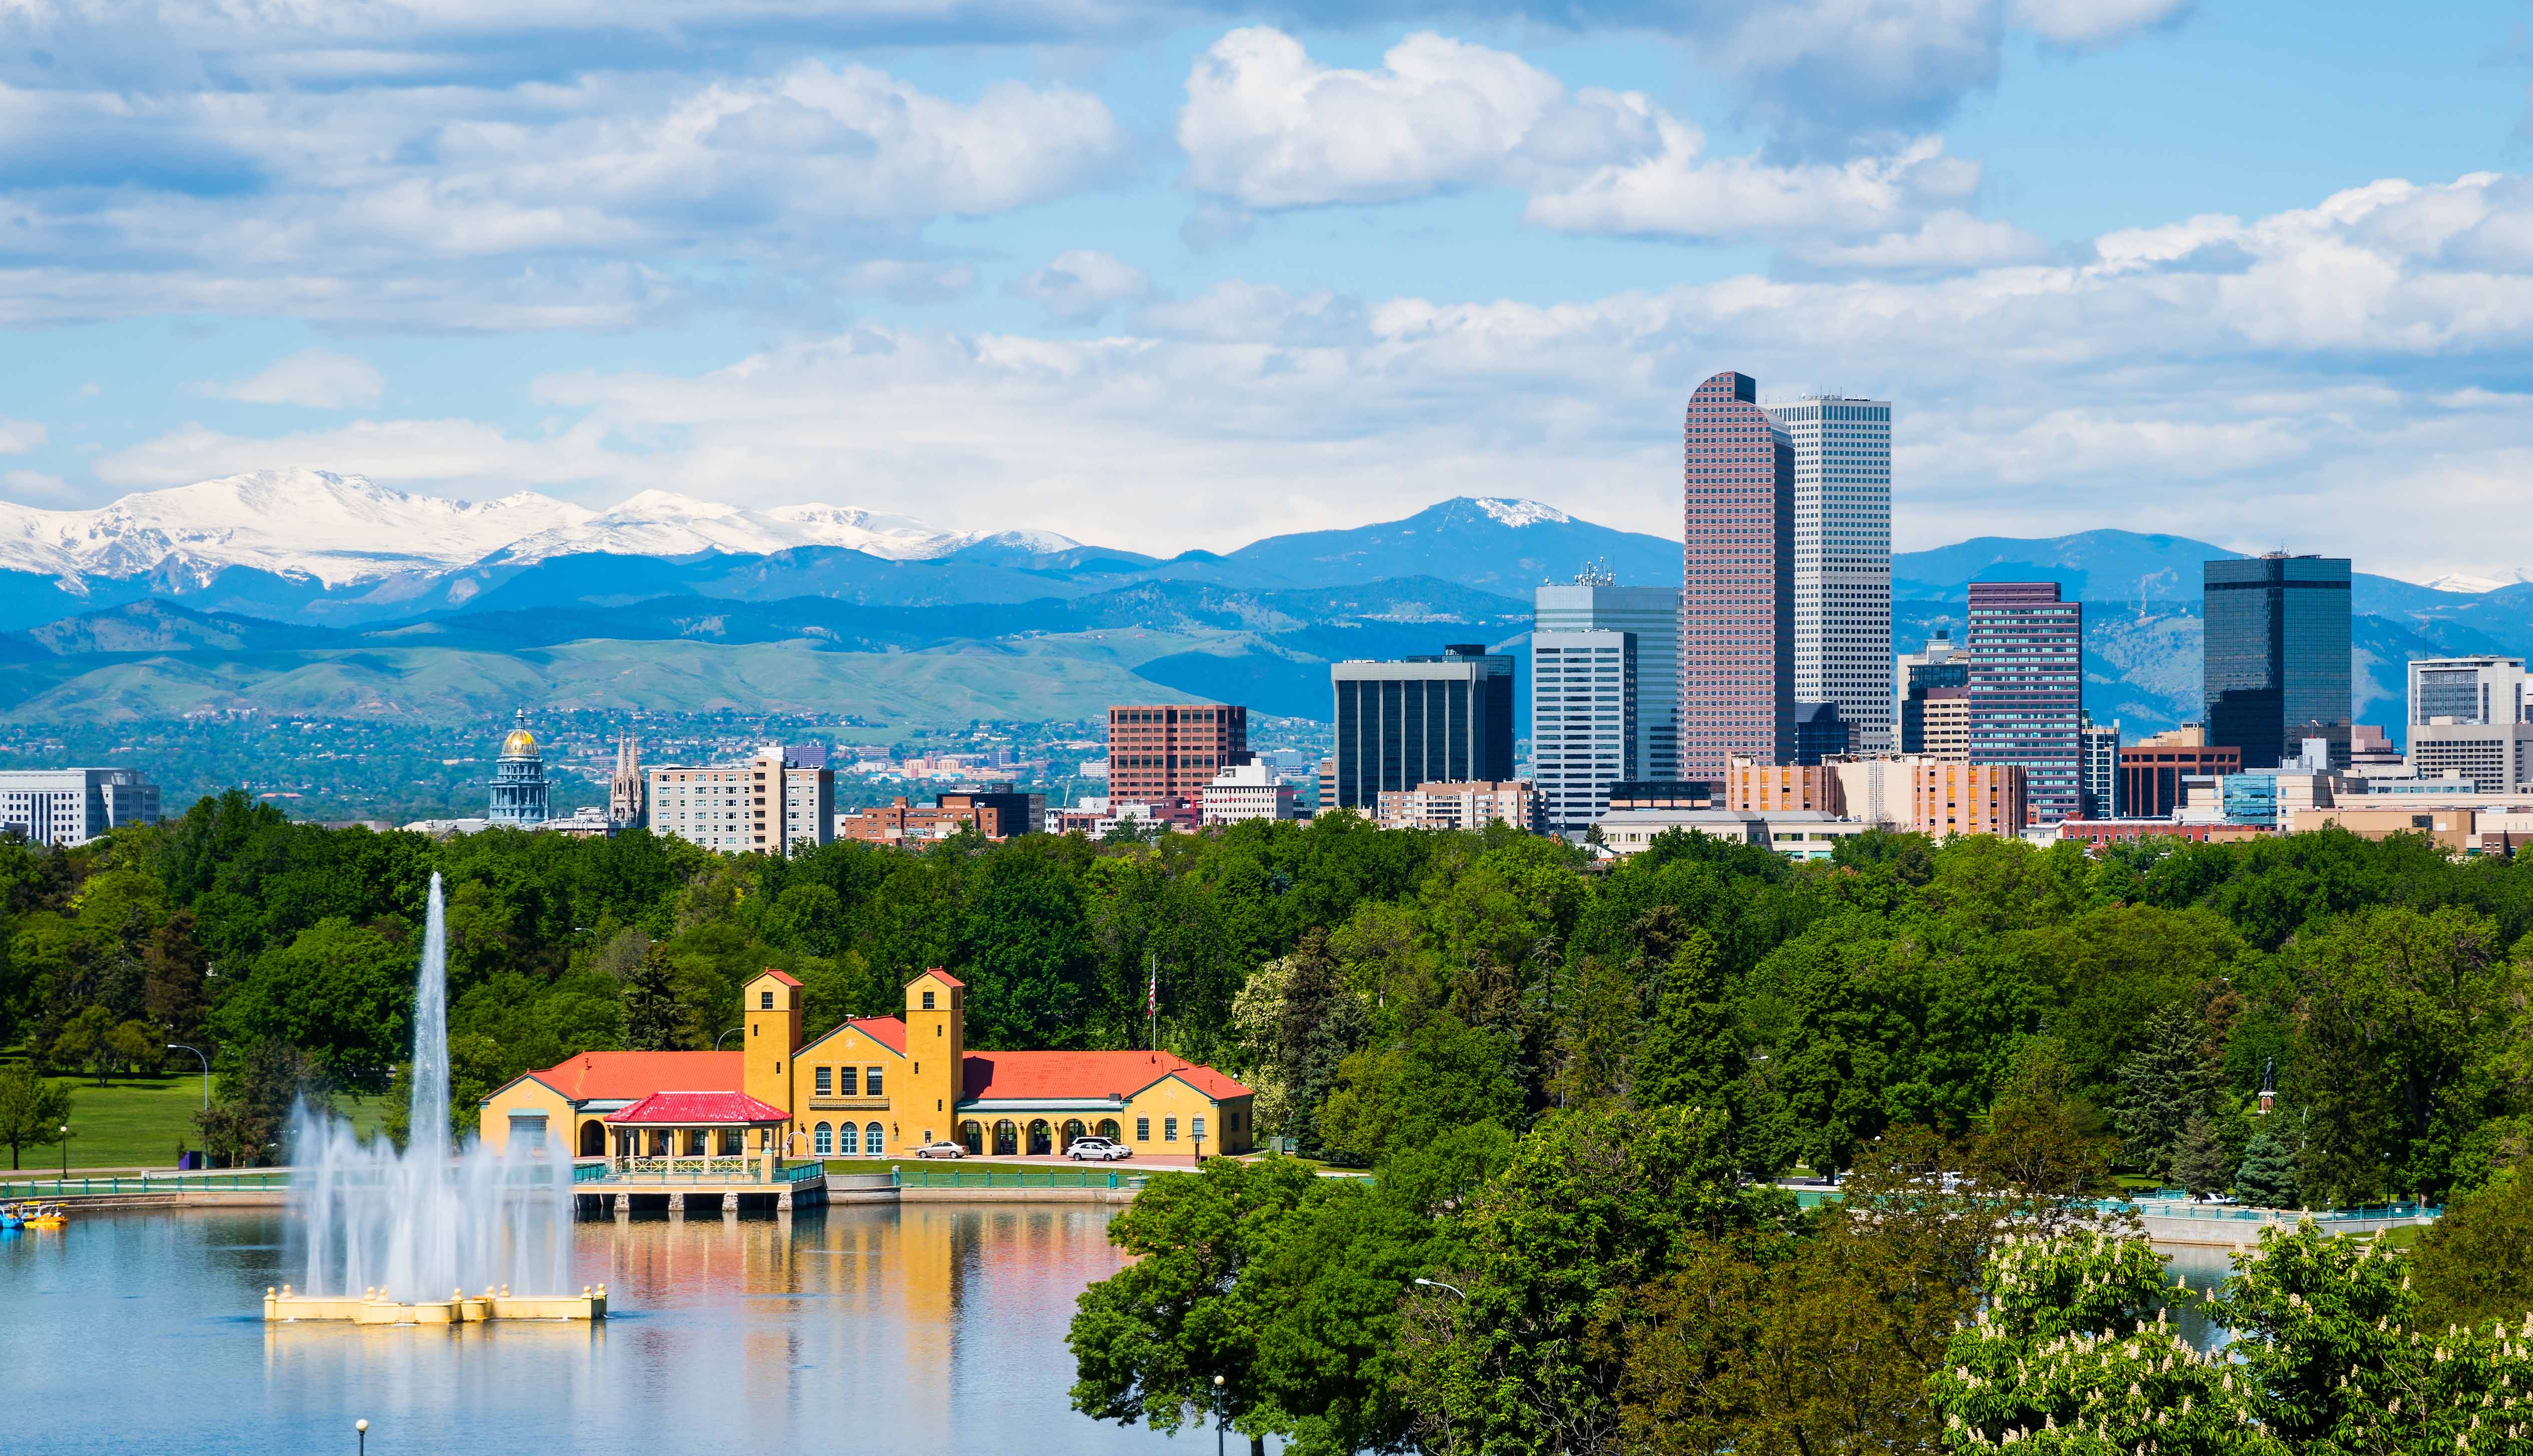 An aerial shot of Denver's City Park in front of the Denver skyline and Rocky Mountains.